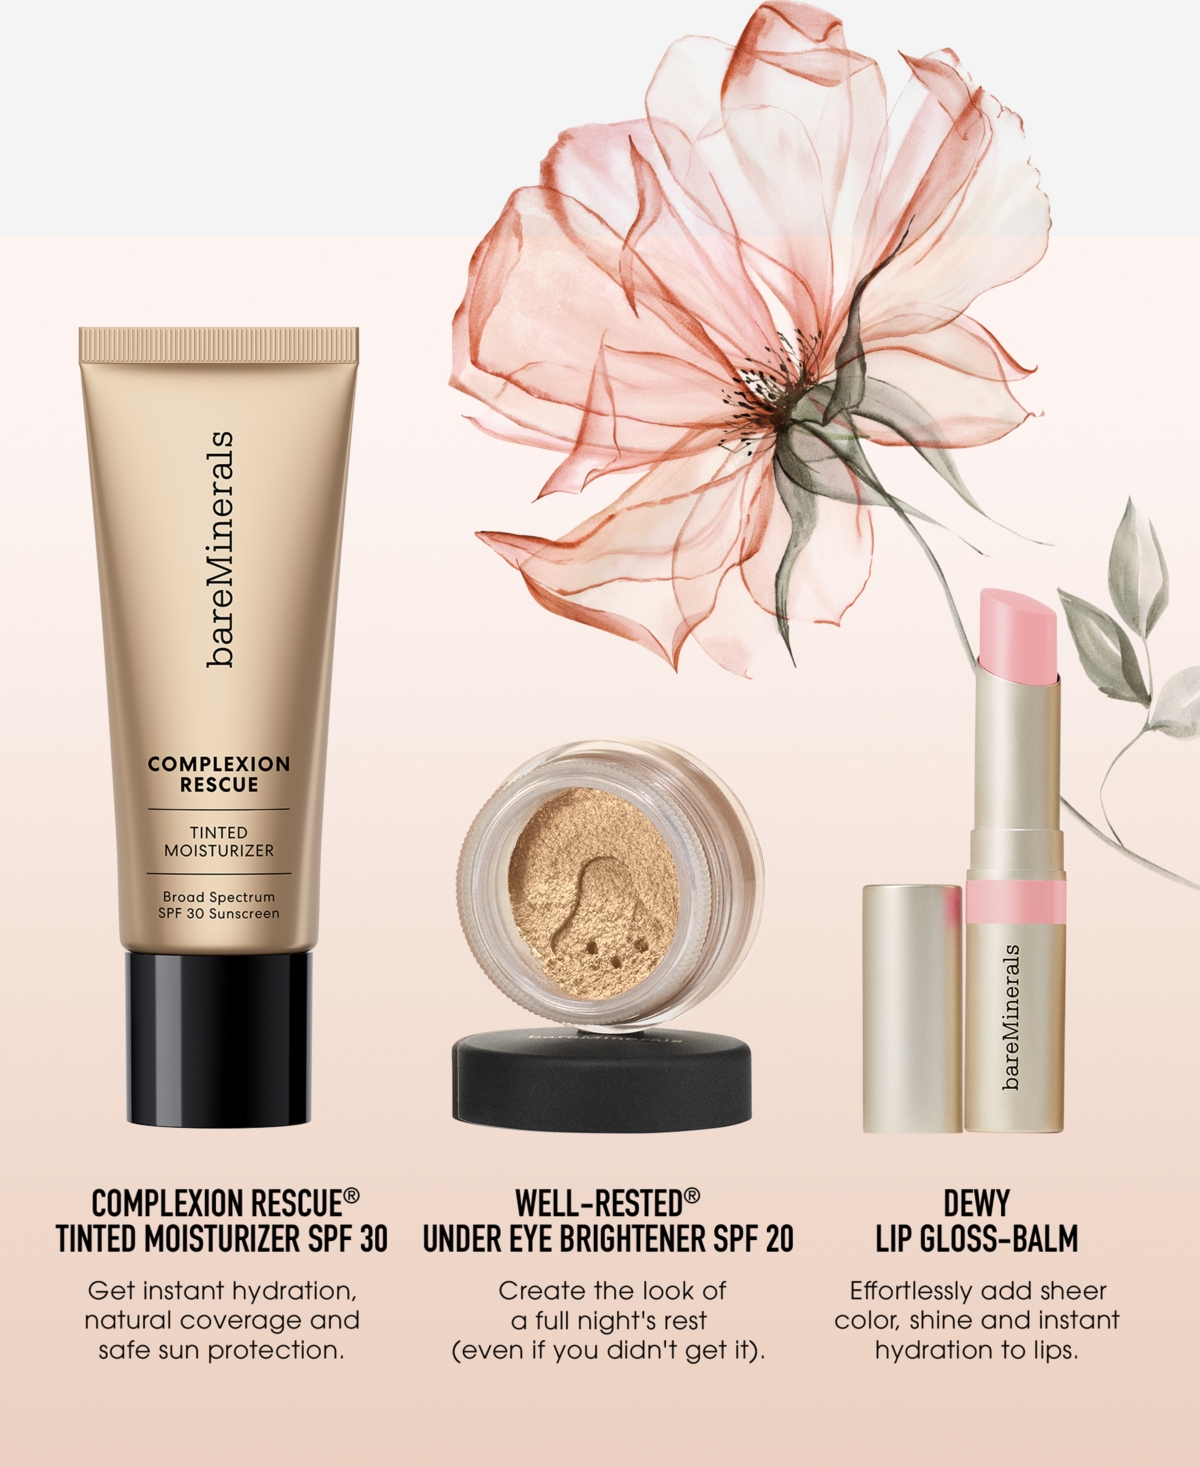 Shop Bareminerals 3-pc. For Moms On The Glow Beauty Set In Tan Amber